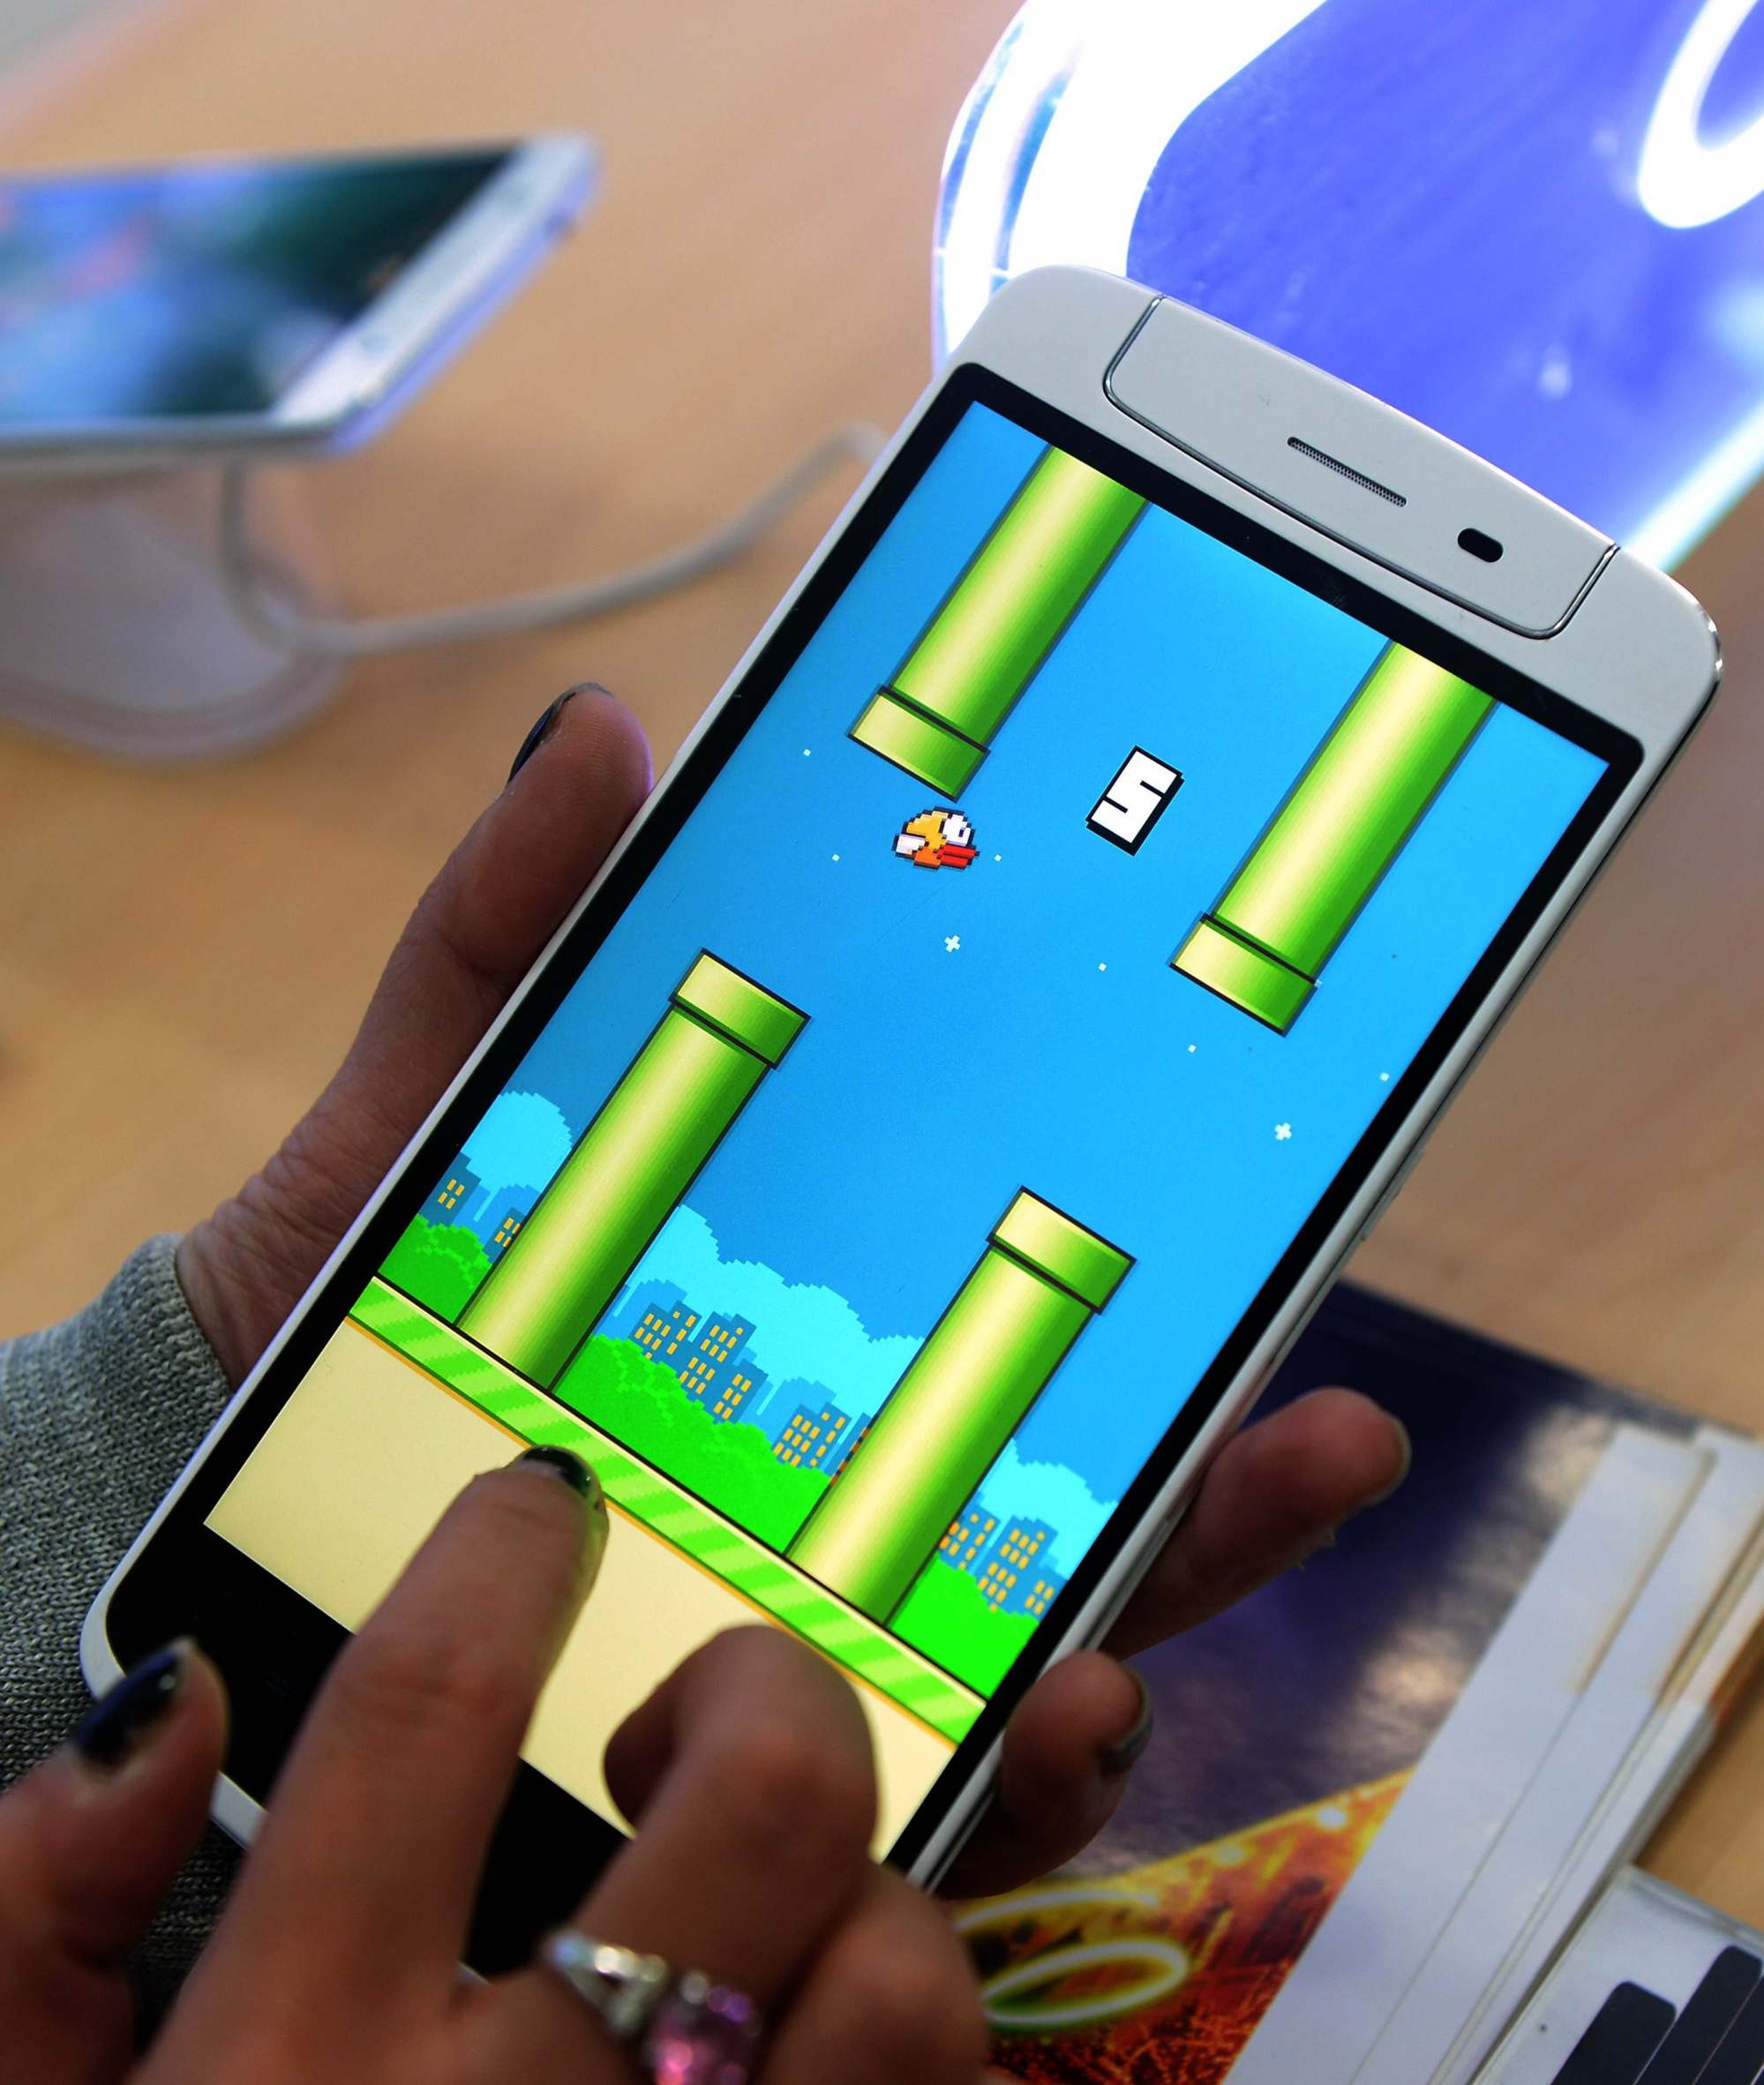 An employee plays the game Flappy Bird at a smartphone store in Hanoi on February 10, 2014. Photo: AFP